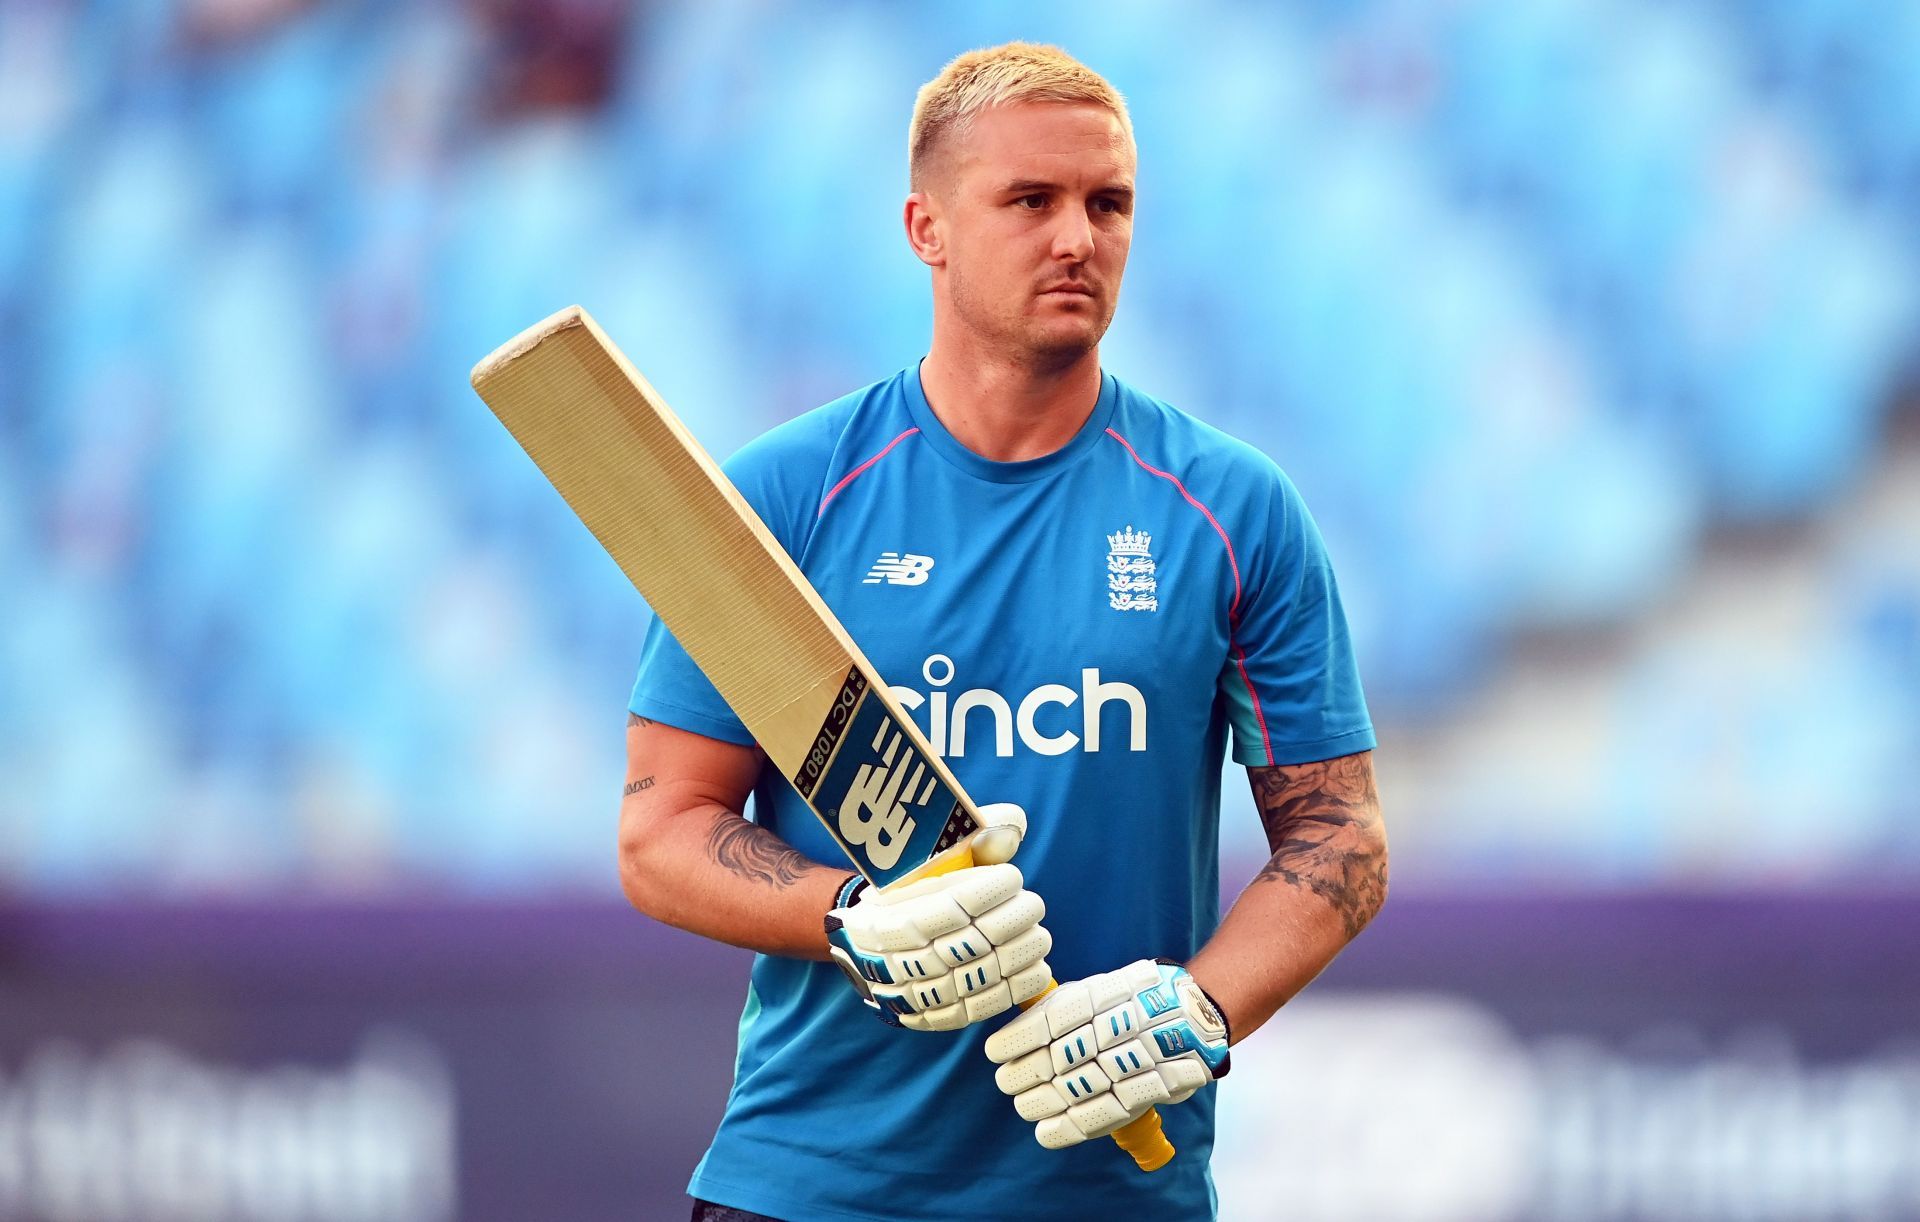 Enter caption Enter caption Jason Roy was picked up by Gujarat Titans (GT) at the IPL 2022 Auction.